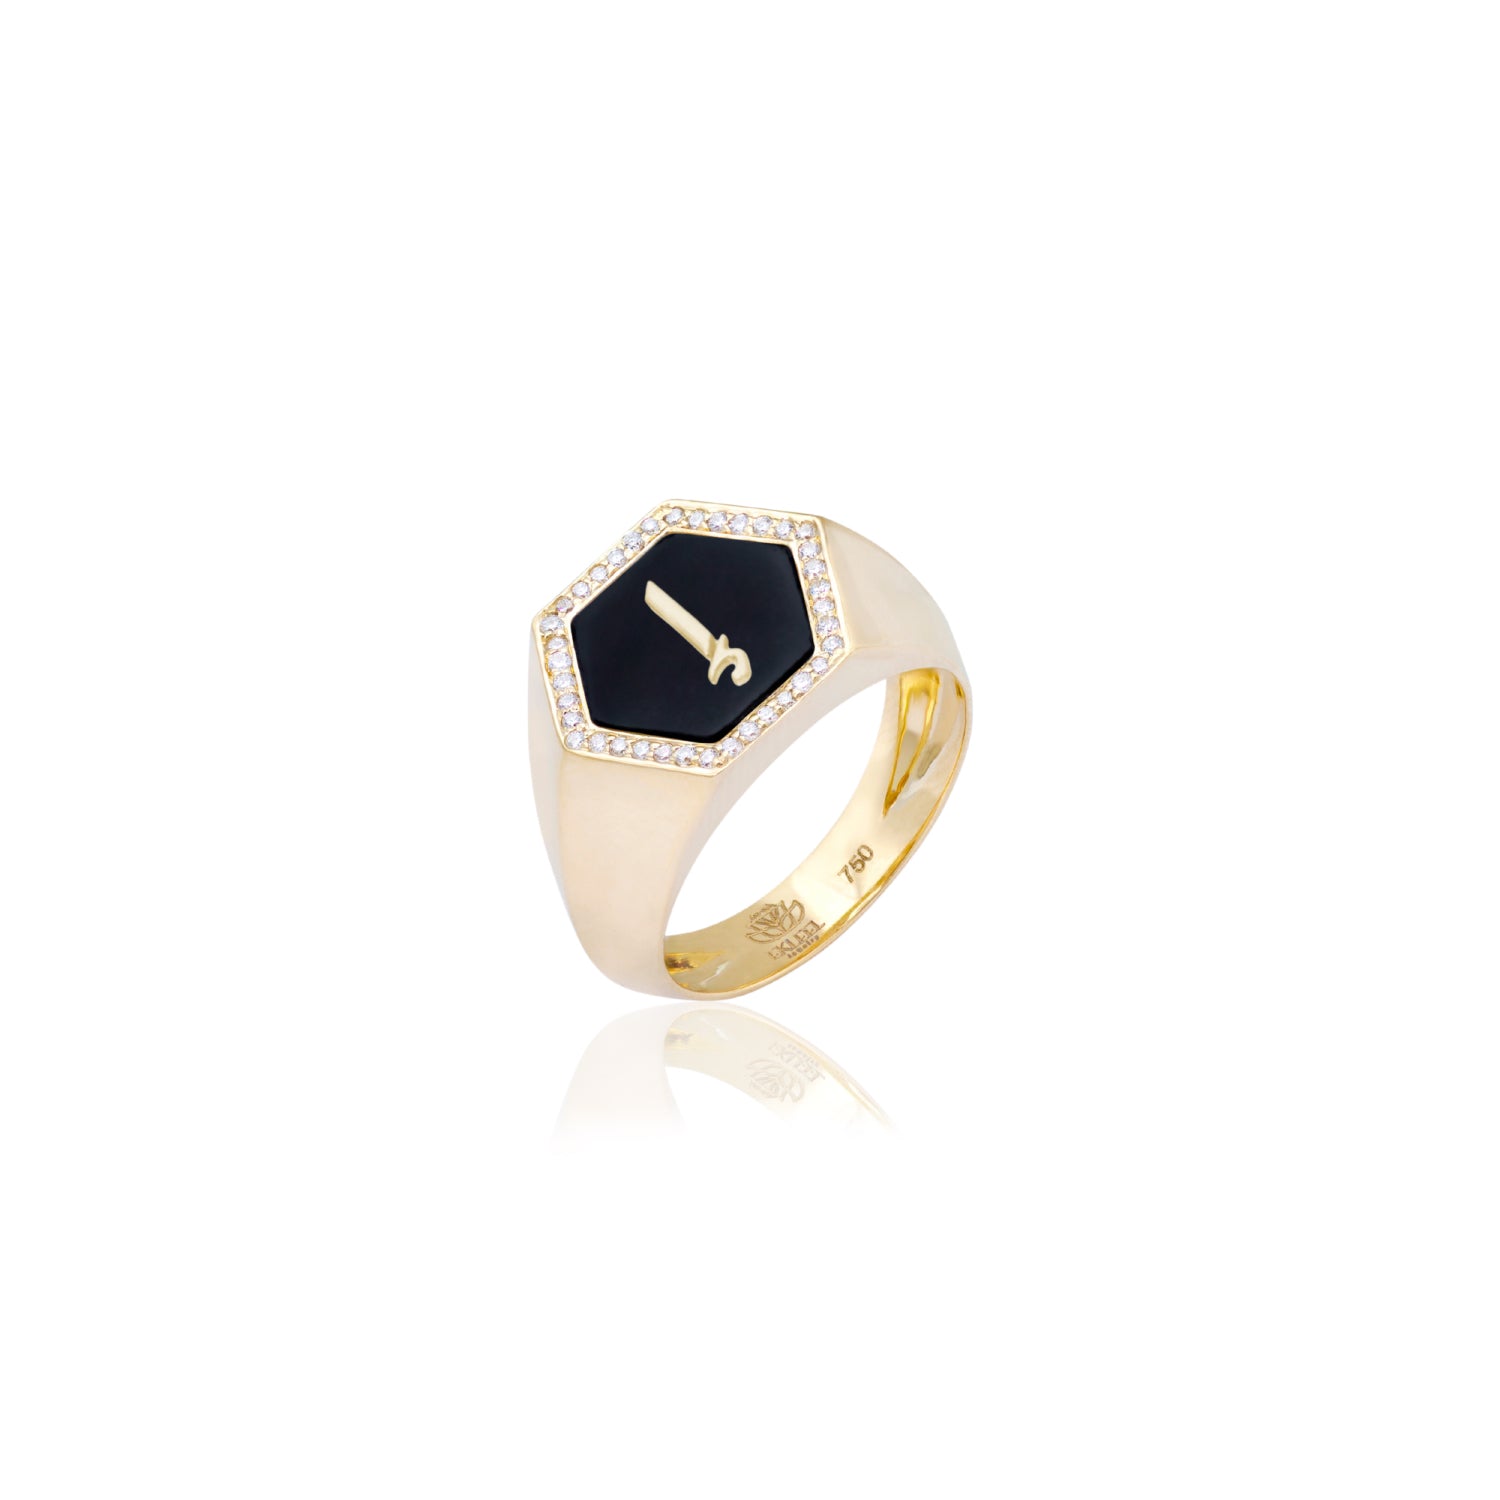 Qamoos 2.0 Letter إ Onyx and Diamond Signet Ring in Yellow Gold